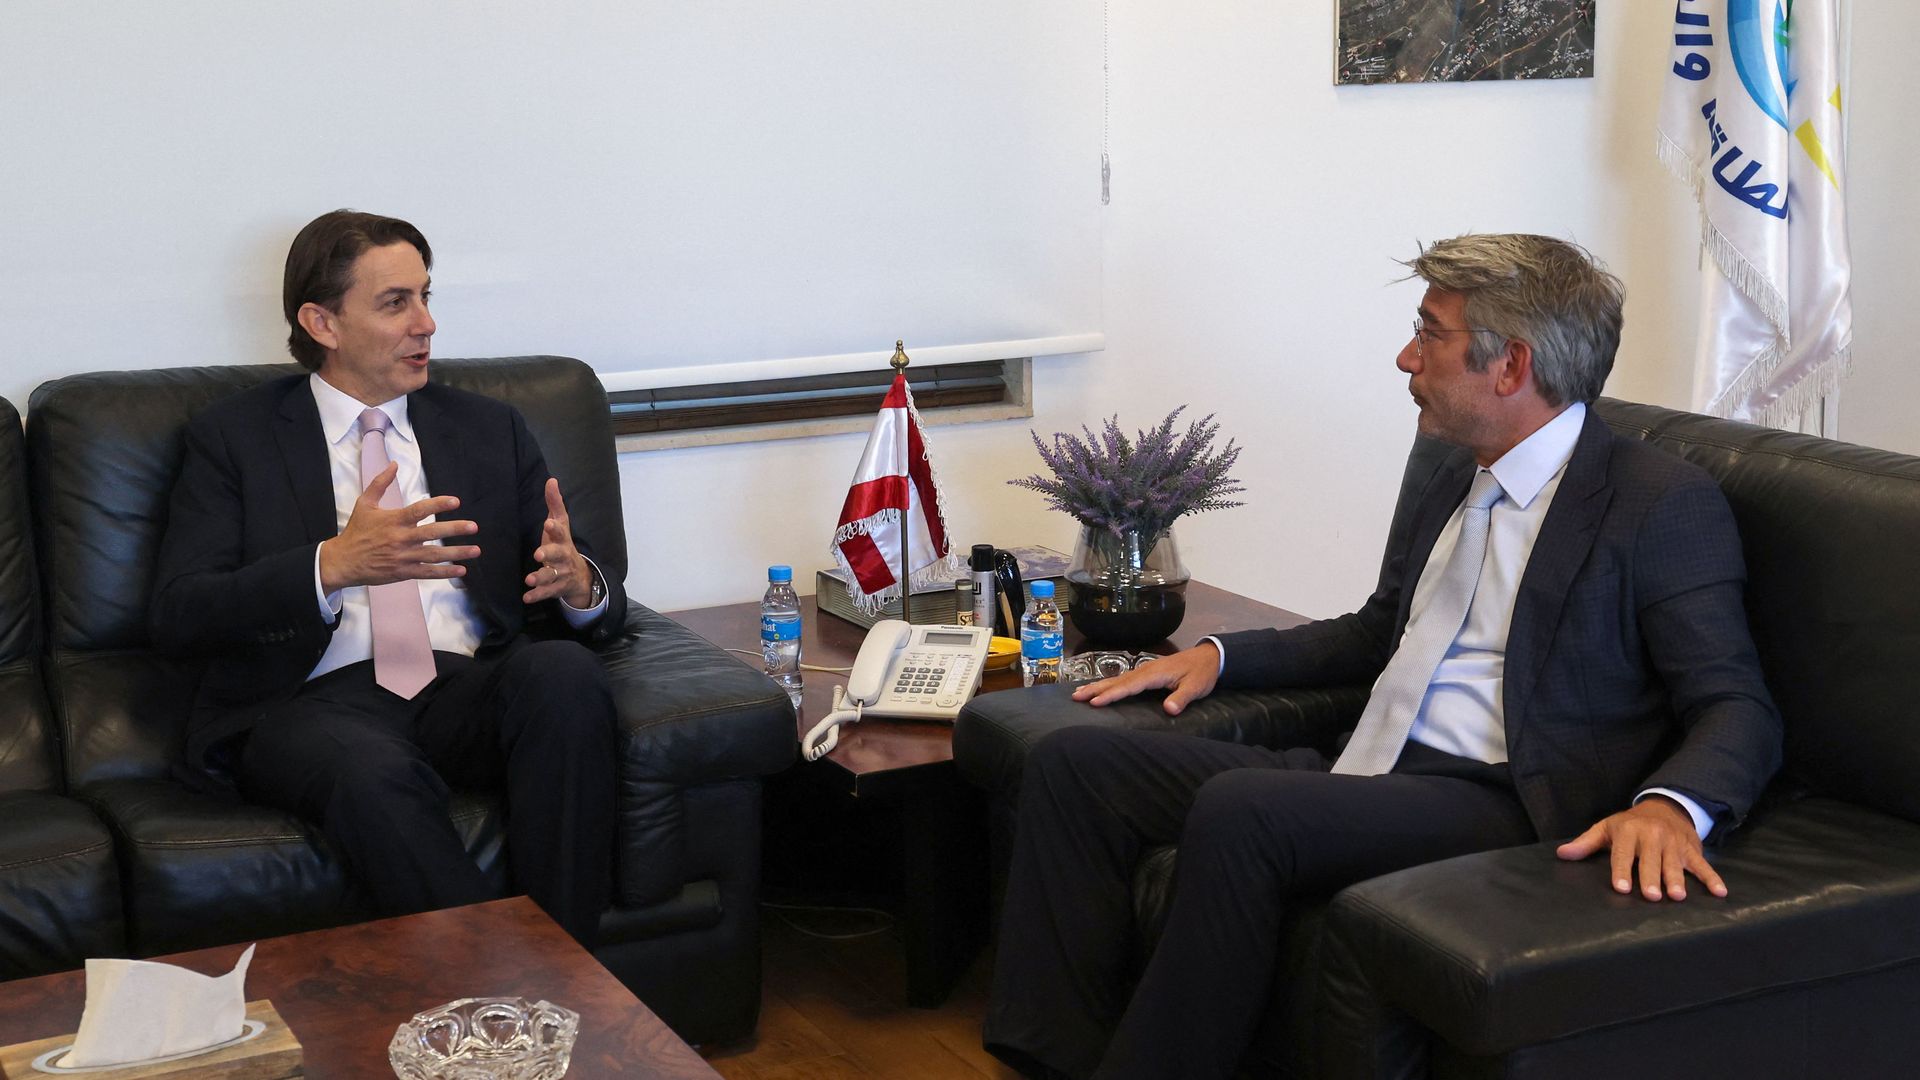 Lebanon's caretaker Energy Minister Walid Fayad (R) meets with US Senior Advisor for Energy Security Amos Hochstein in Beirut on June 13, 2022.